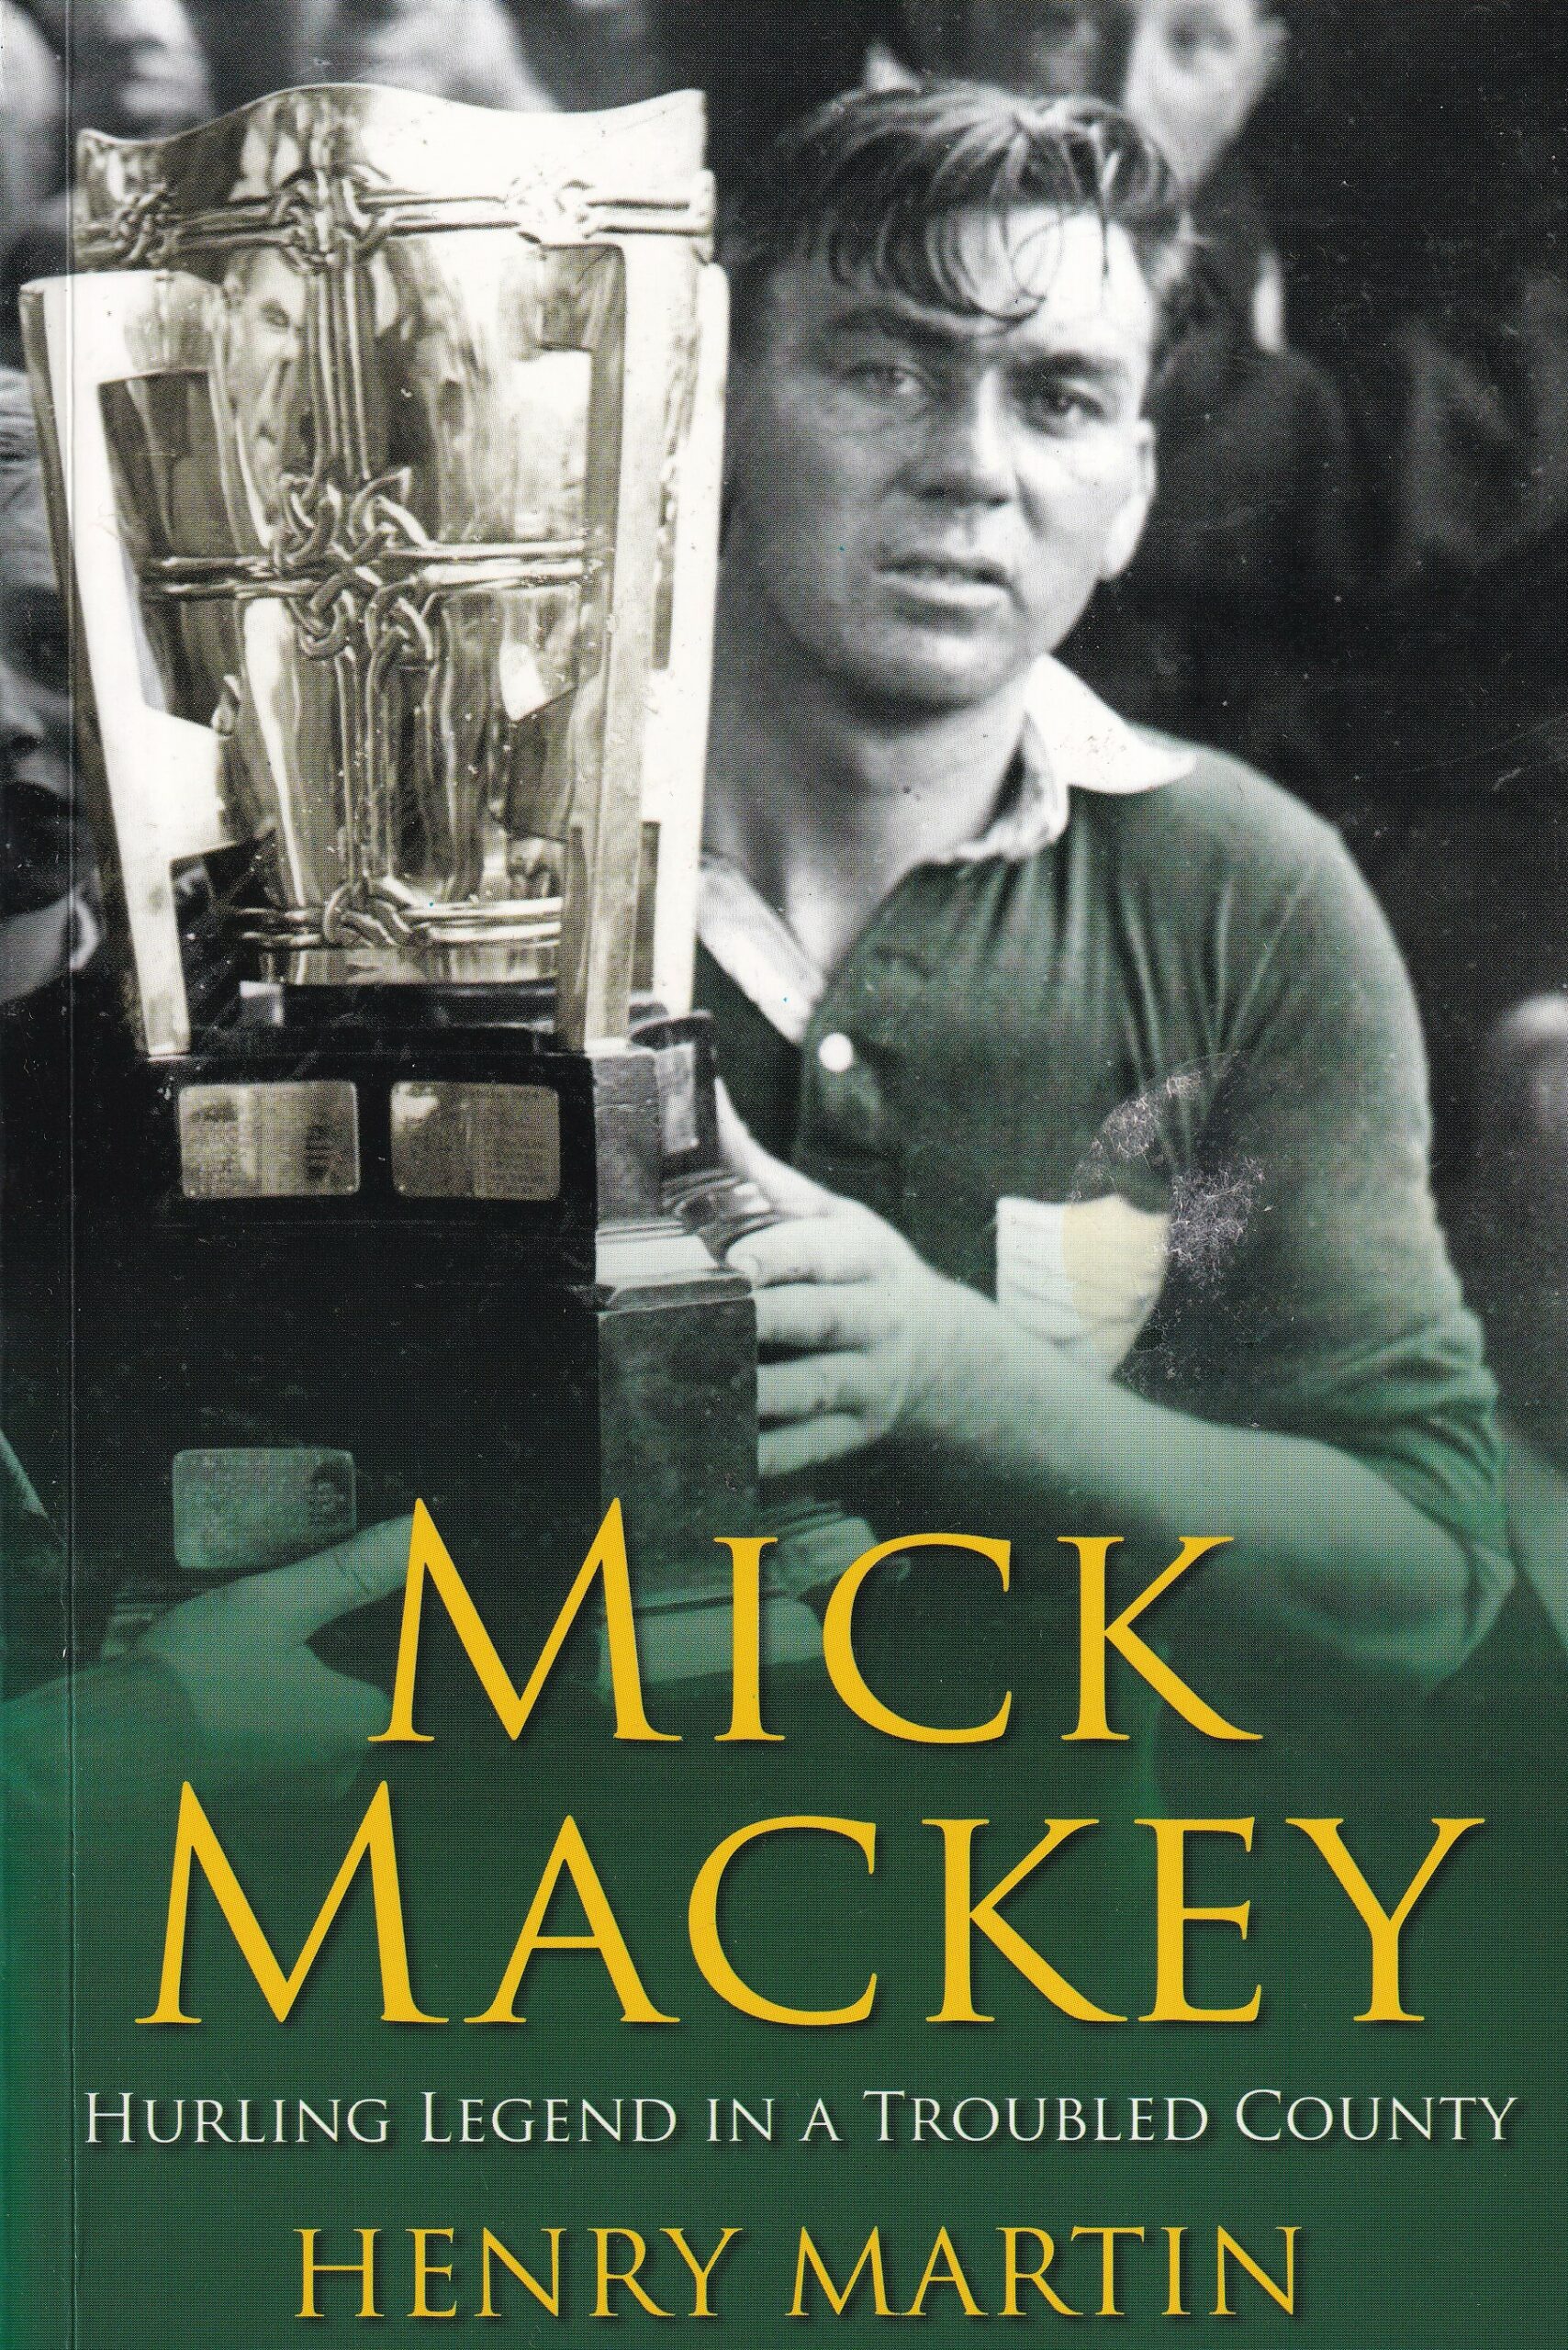 Mick Mackey: Hurling Legend in a Troubled County | Henry Martin | Charlie Byrne's